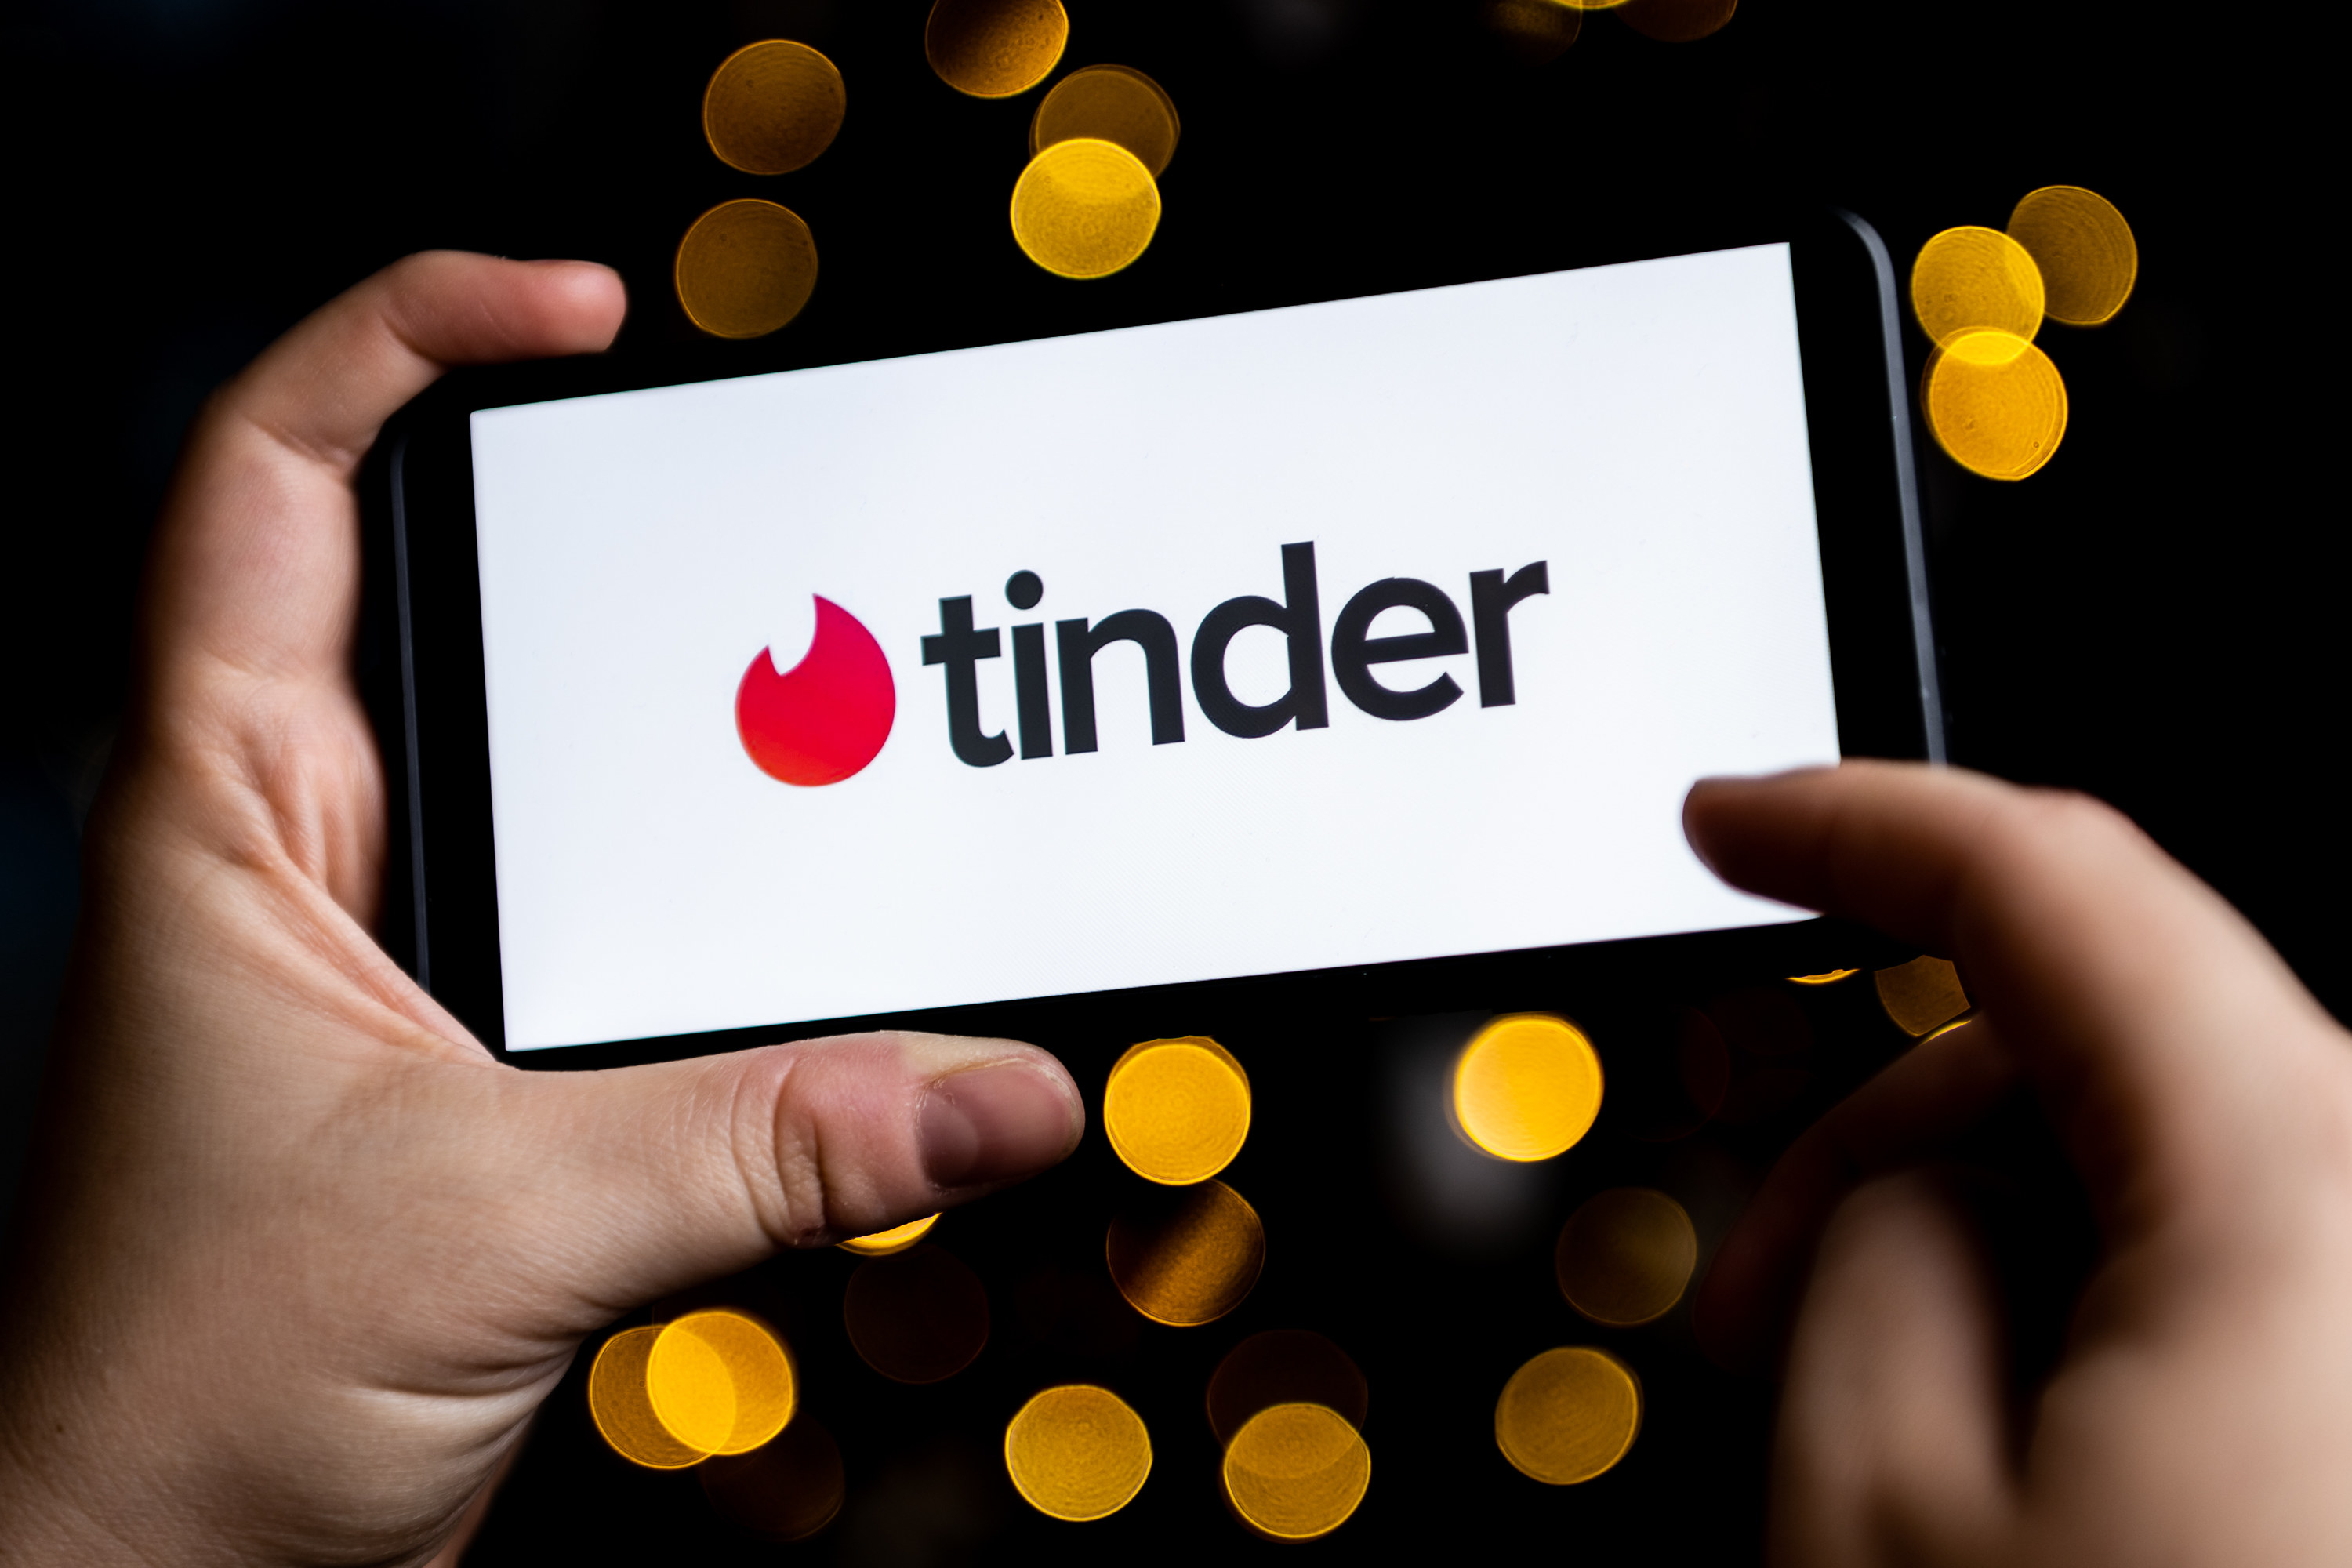 hands holding phone open to Tinder app